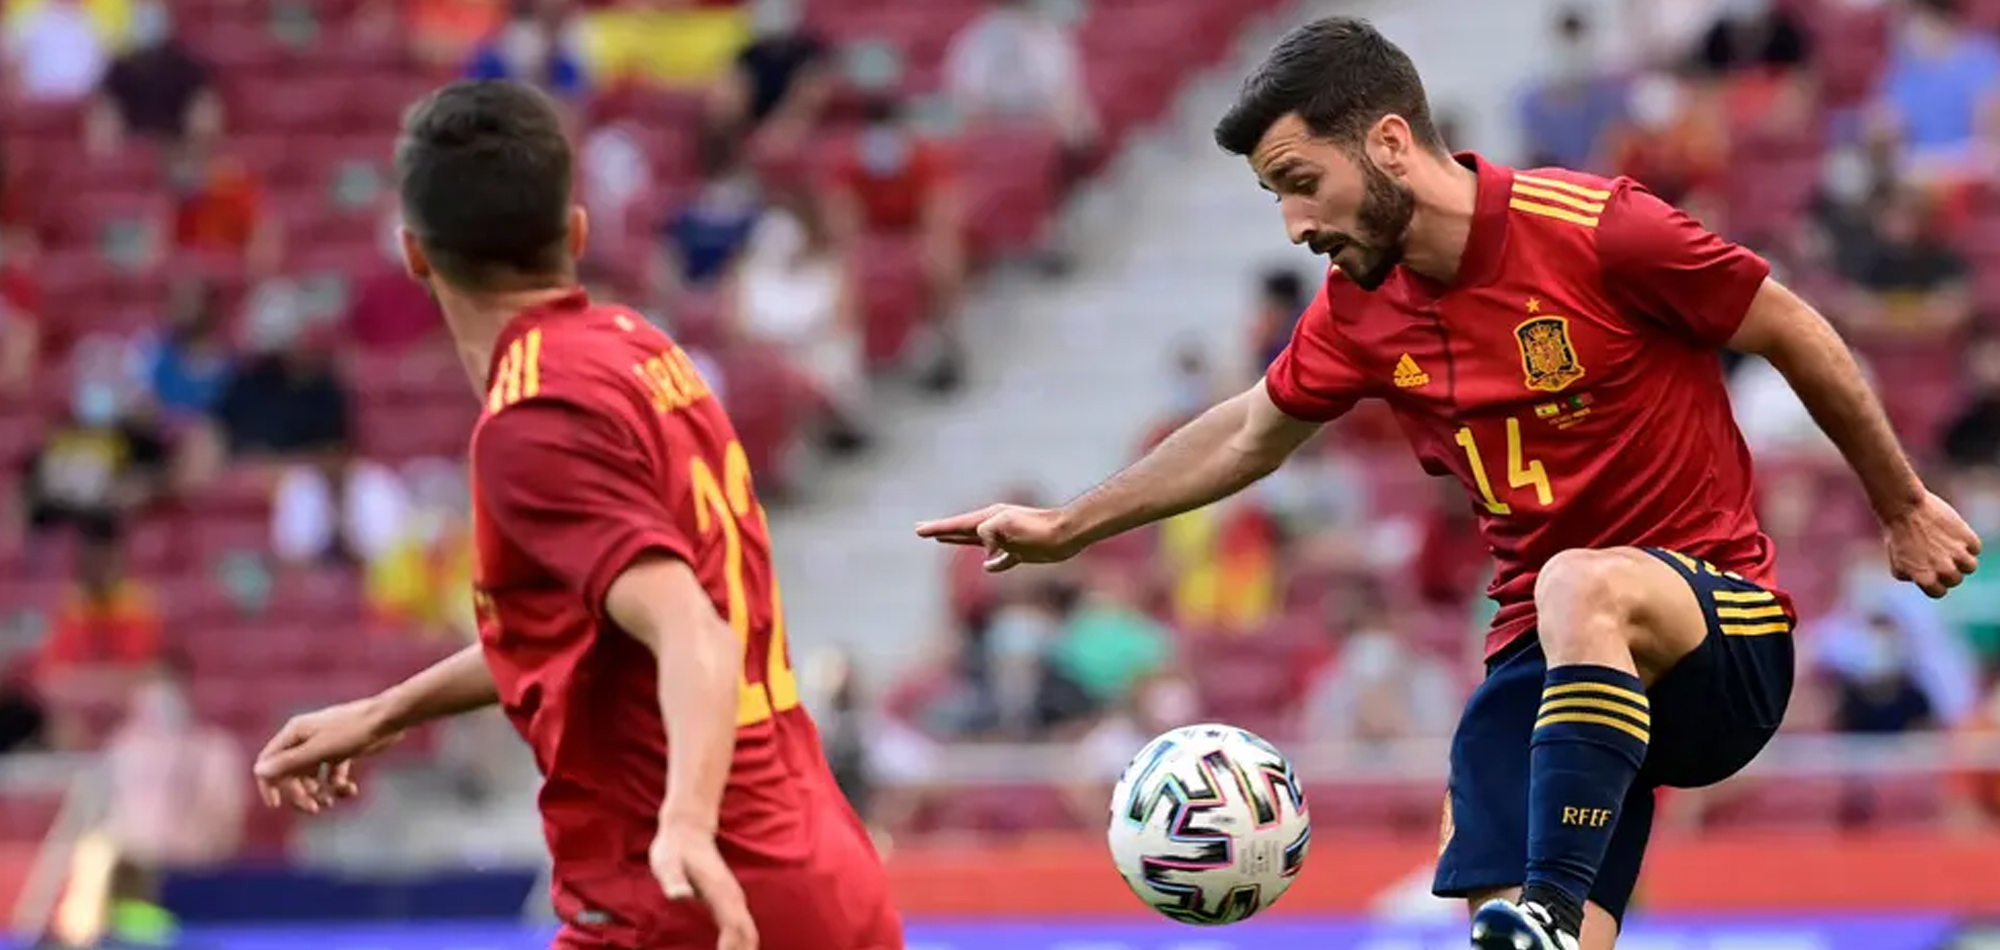 Spain players vaccinated ahead of Euro 2020